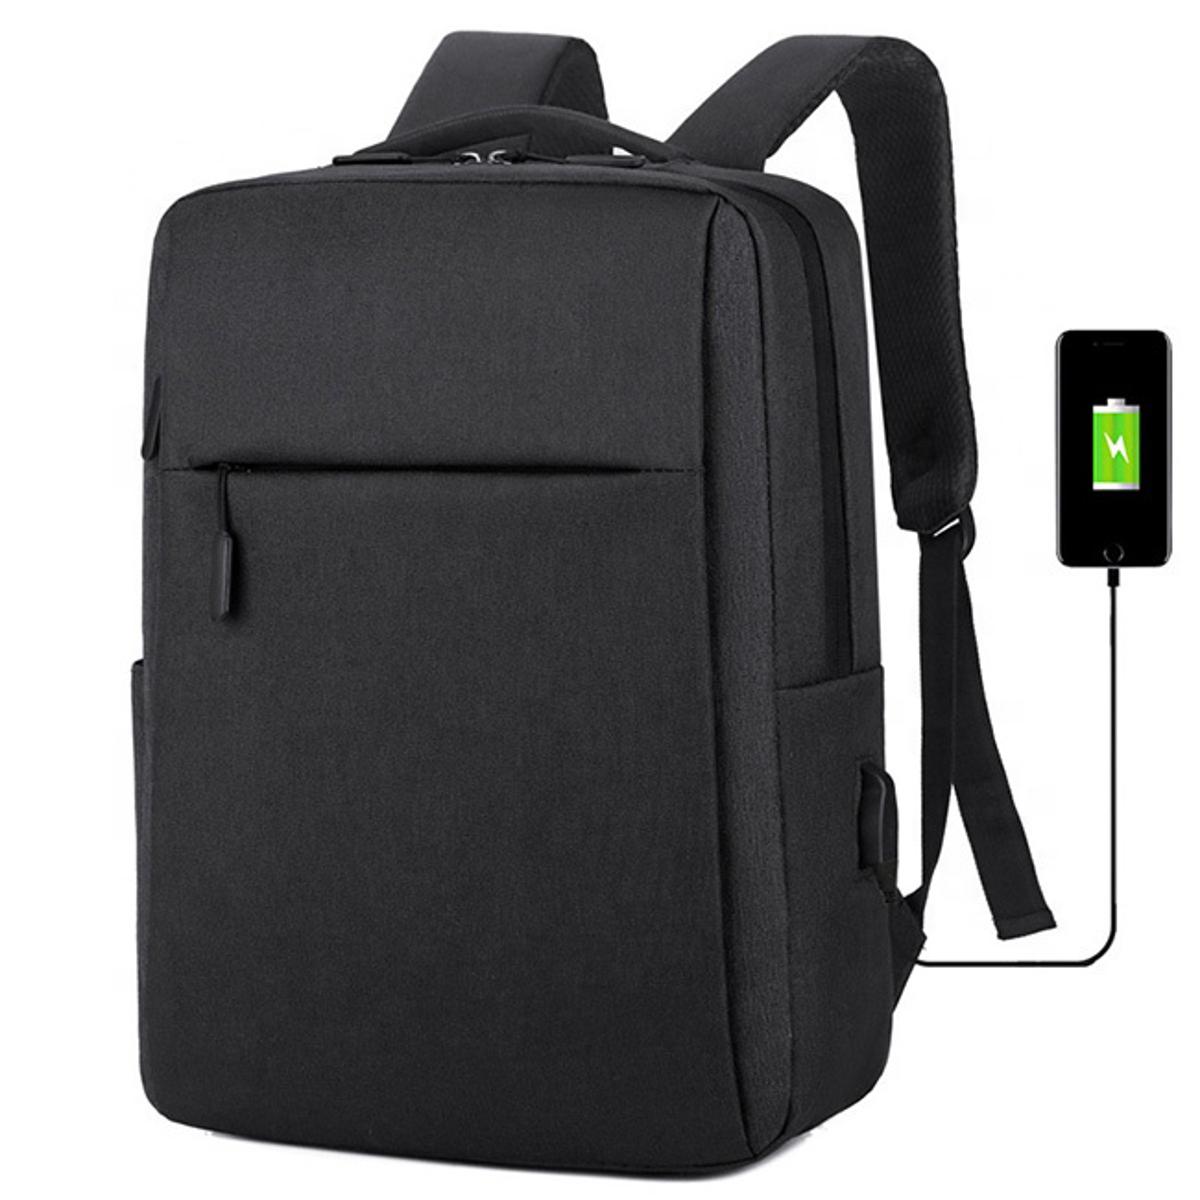 EMPIRON USB Charging Laptop Bag With USB Connectivity Casual well designed for to 15-17-Inch Laptop ELB03